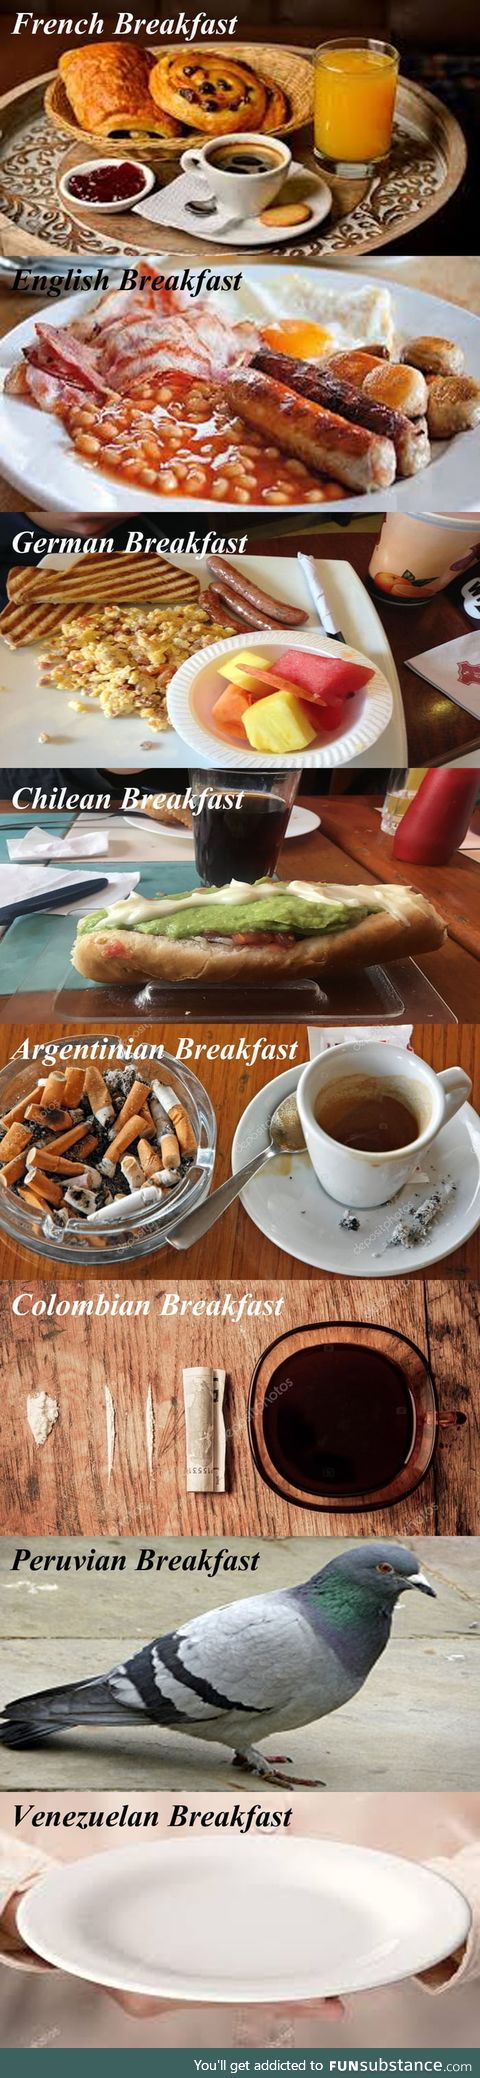 Breakfasts from some countries